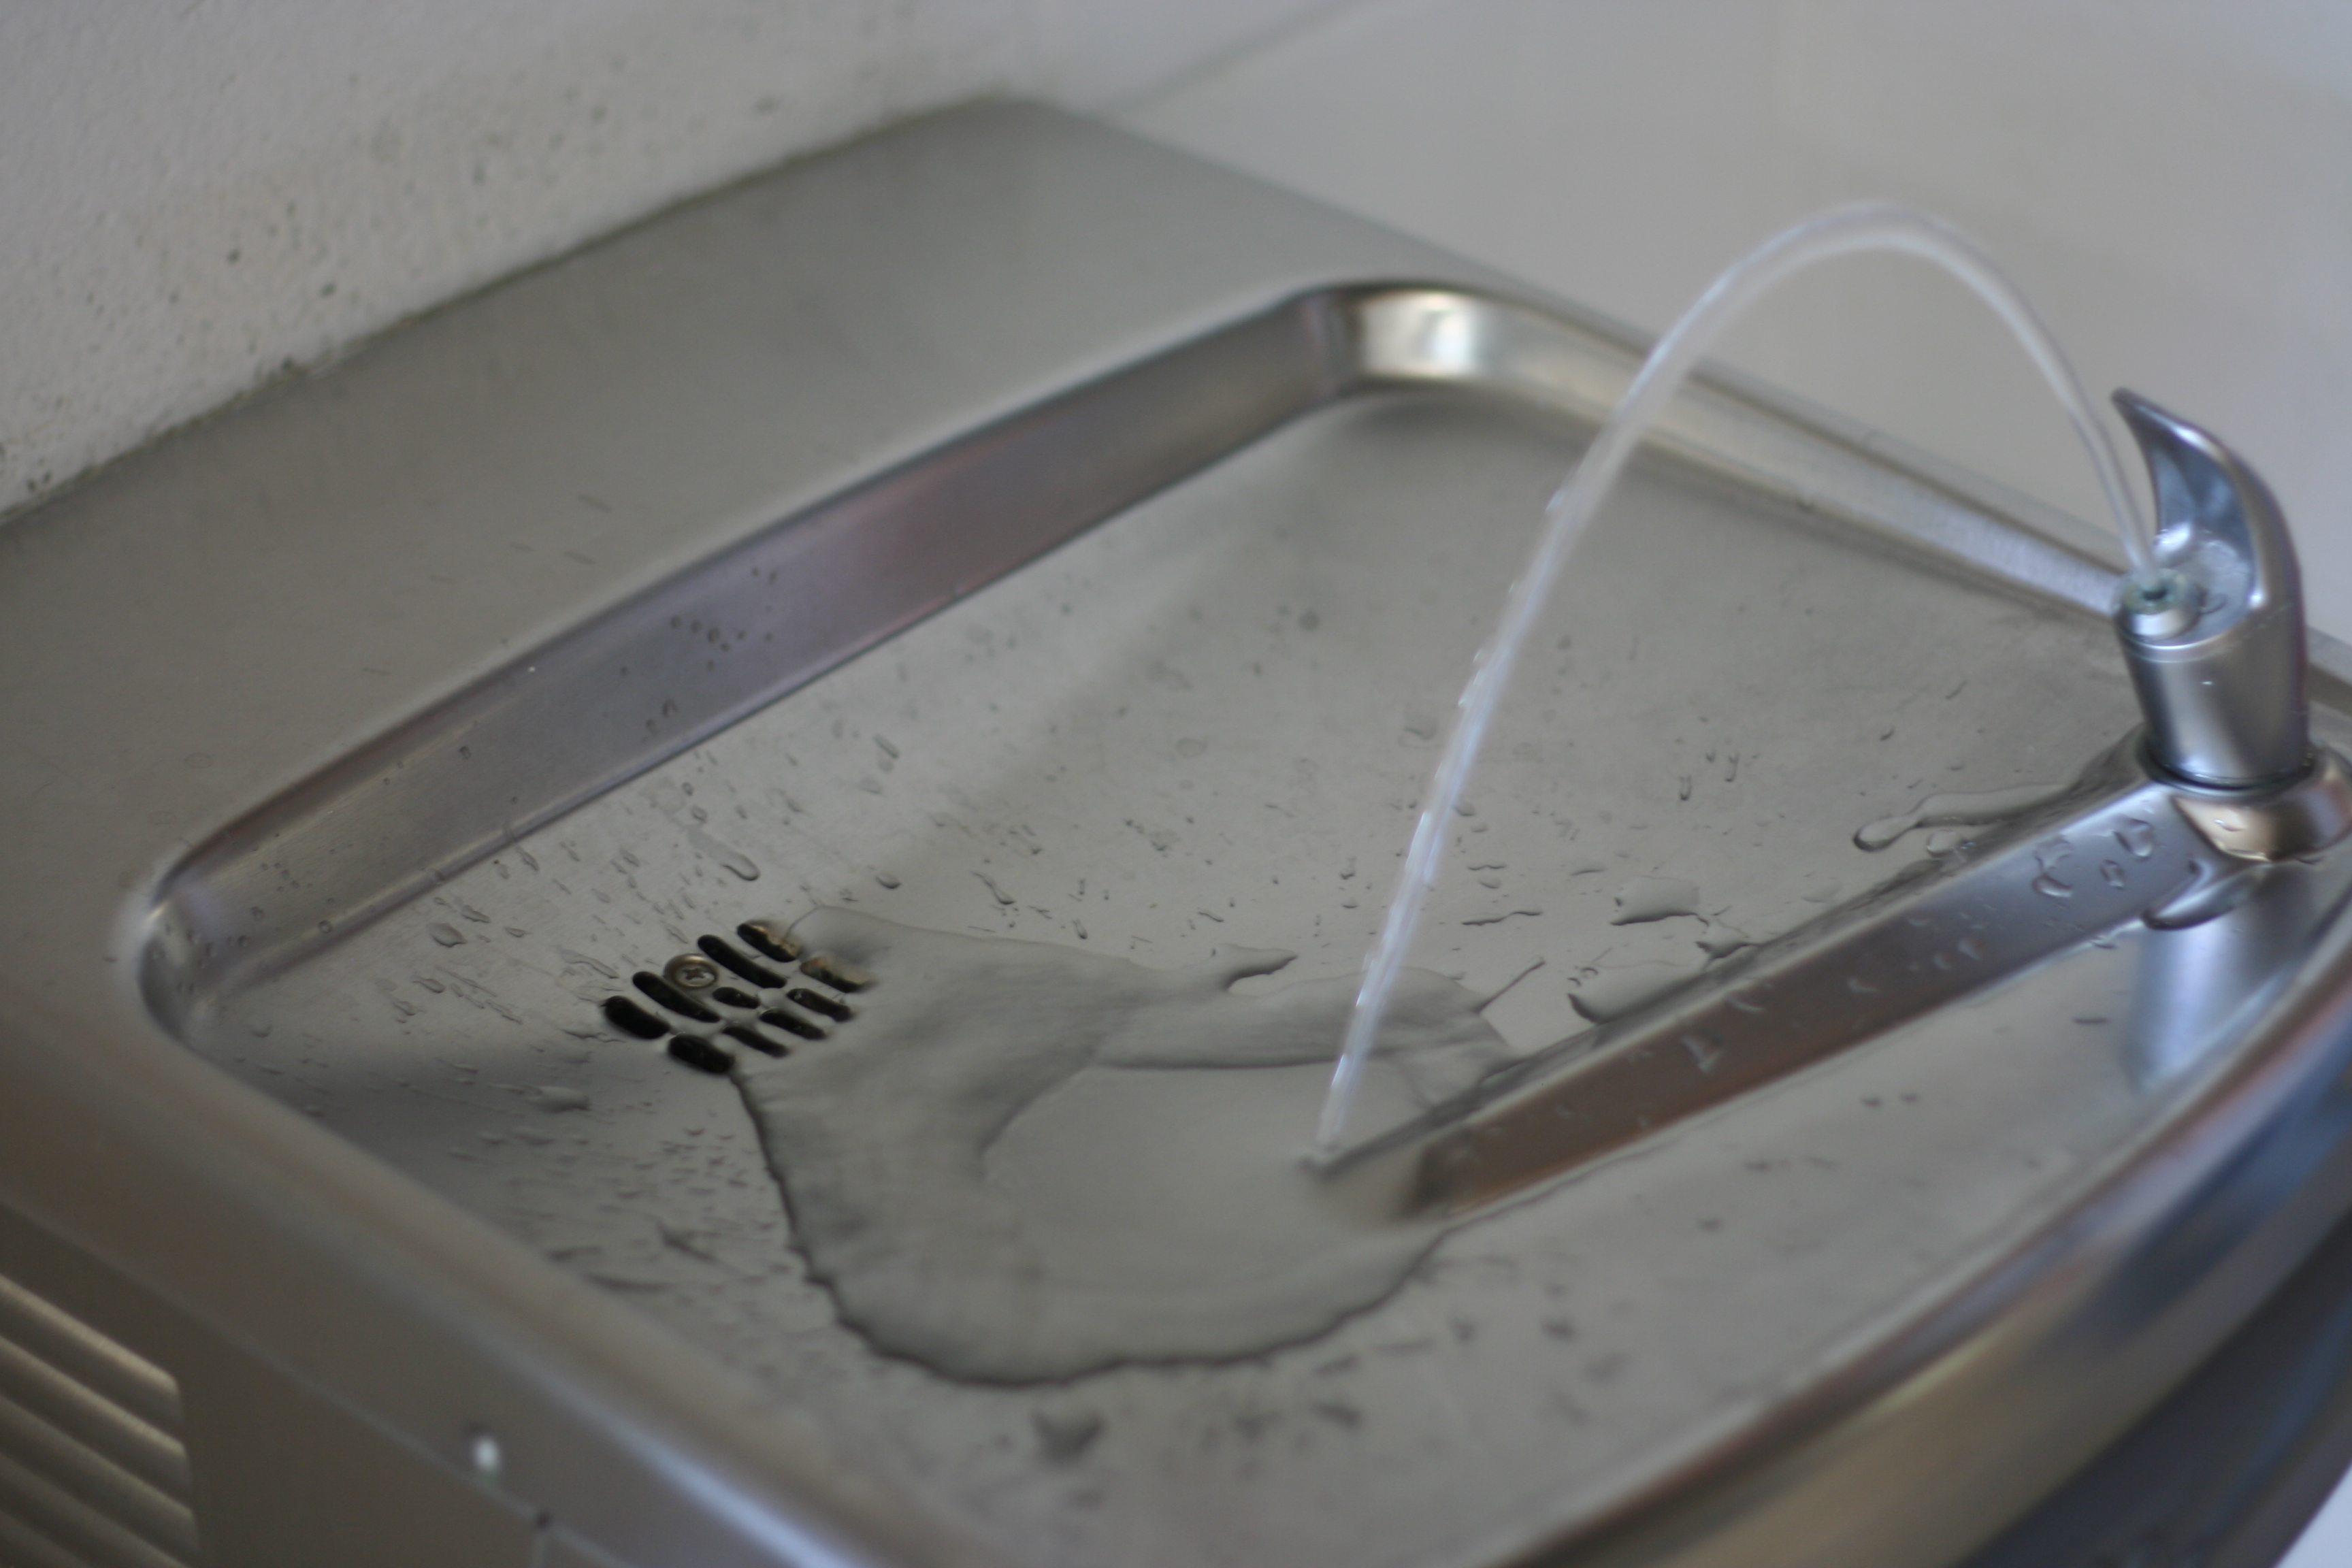 ALL SCHOOL WATER FOUNTAINS TO BE TESTED FOR LEAD - 98.7 The Coast WCZT